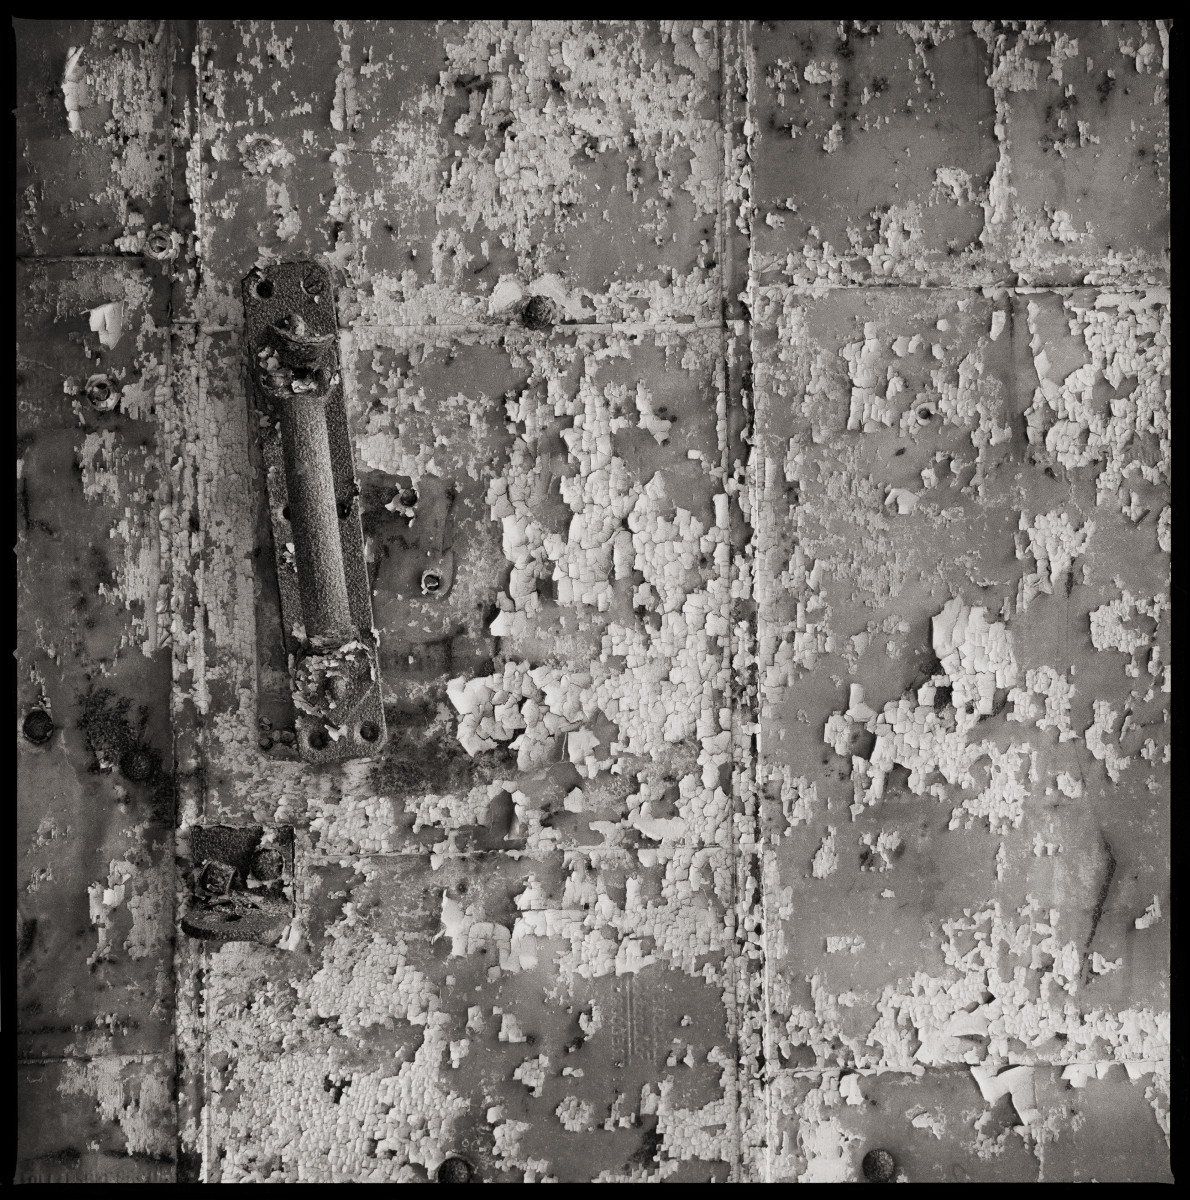 Untitled by Eric T. Kunsman  Image:  ID: A black and white image shows a close up of a handle on the wall.  There is an abundance of grime on and around the handle.  The paint on the wall is peeling.  The handle is vertical, but has been shifted right over the years.